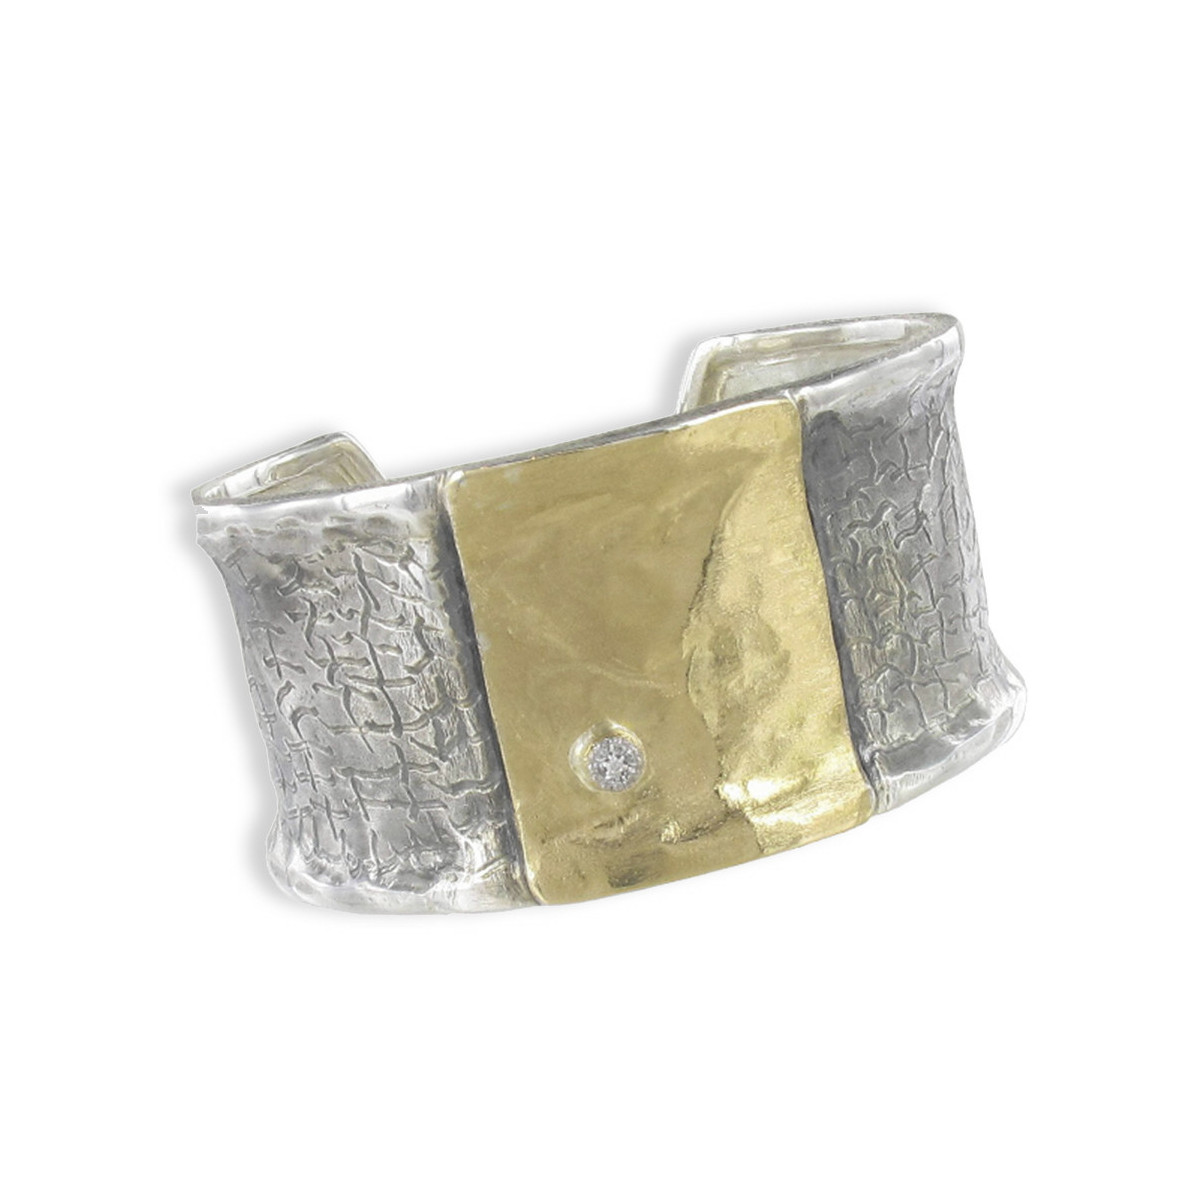 SILVER AND GOLD BRACELET WITH DIAMONDS